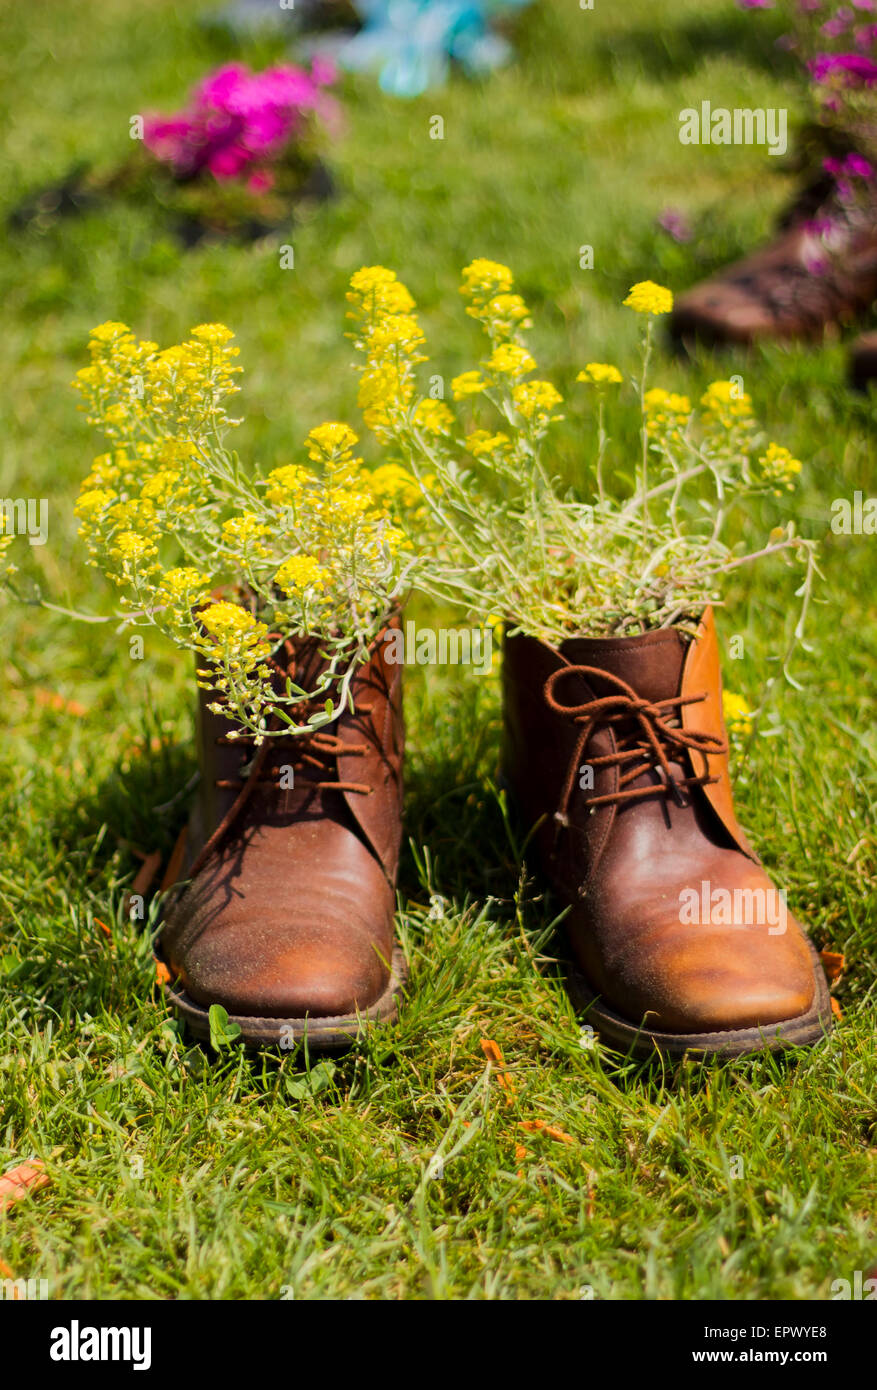 Funny shoes with yellow flowers. Stock Photo